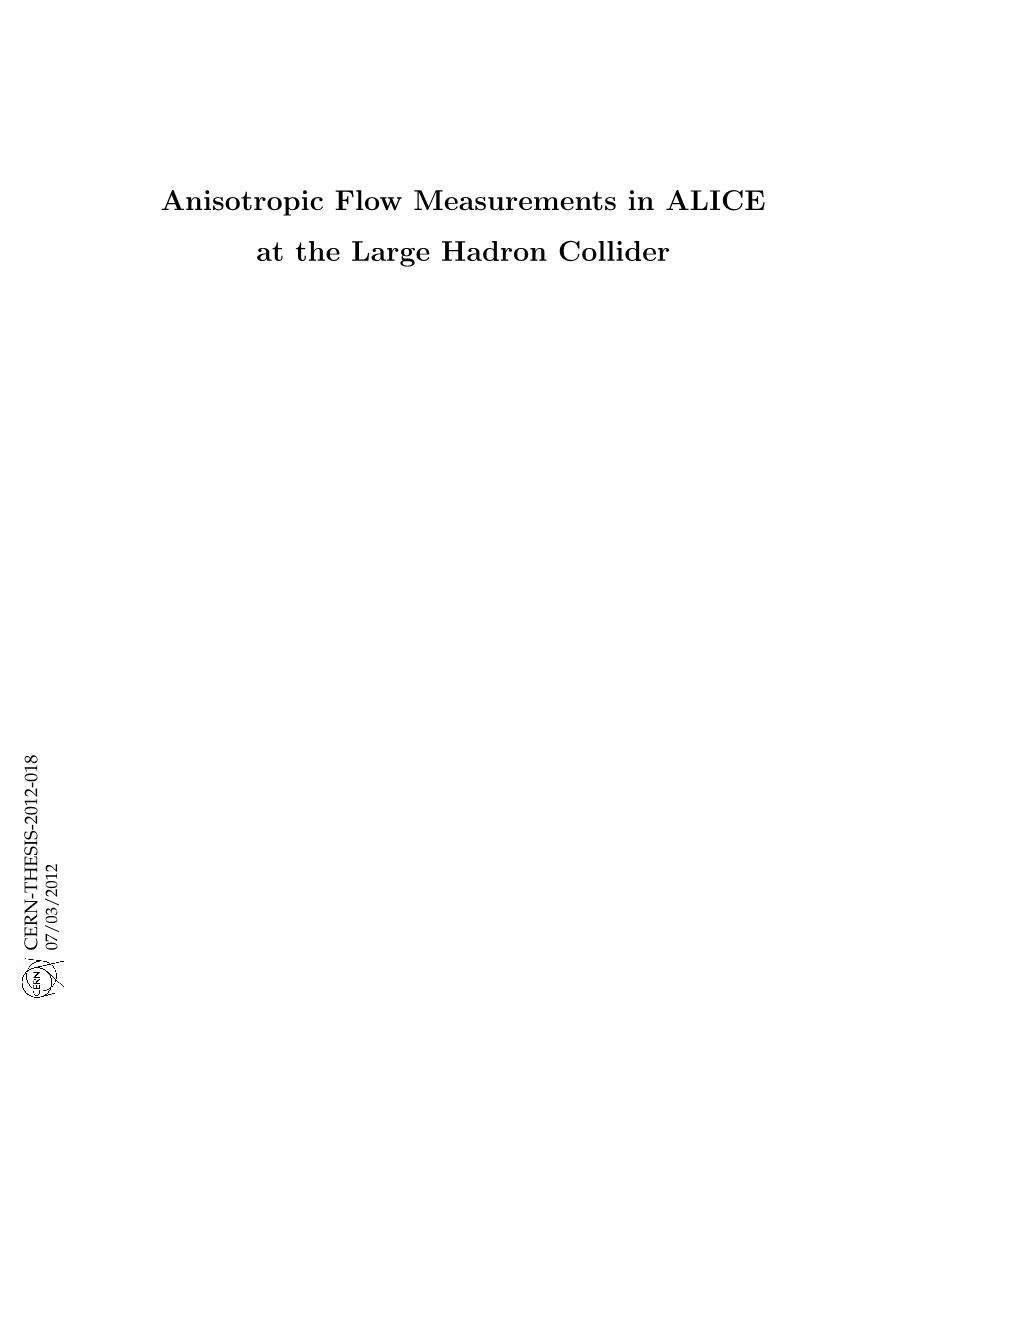 Anisotropic Flow Measurements in ALICE at the Large Hadron Collider